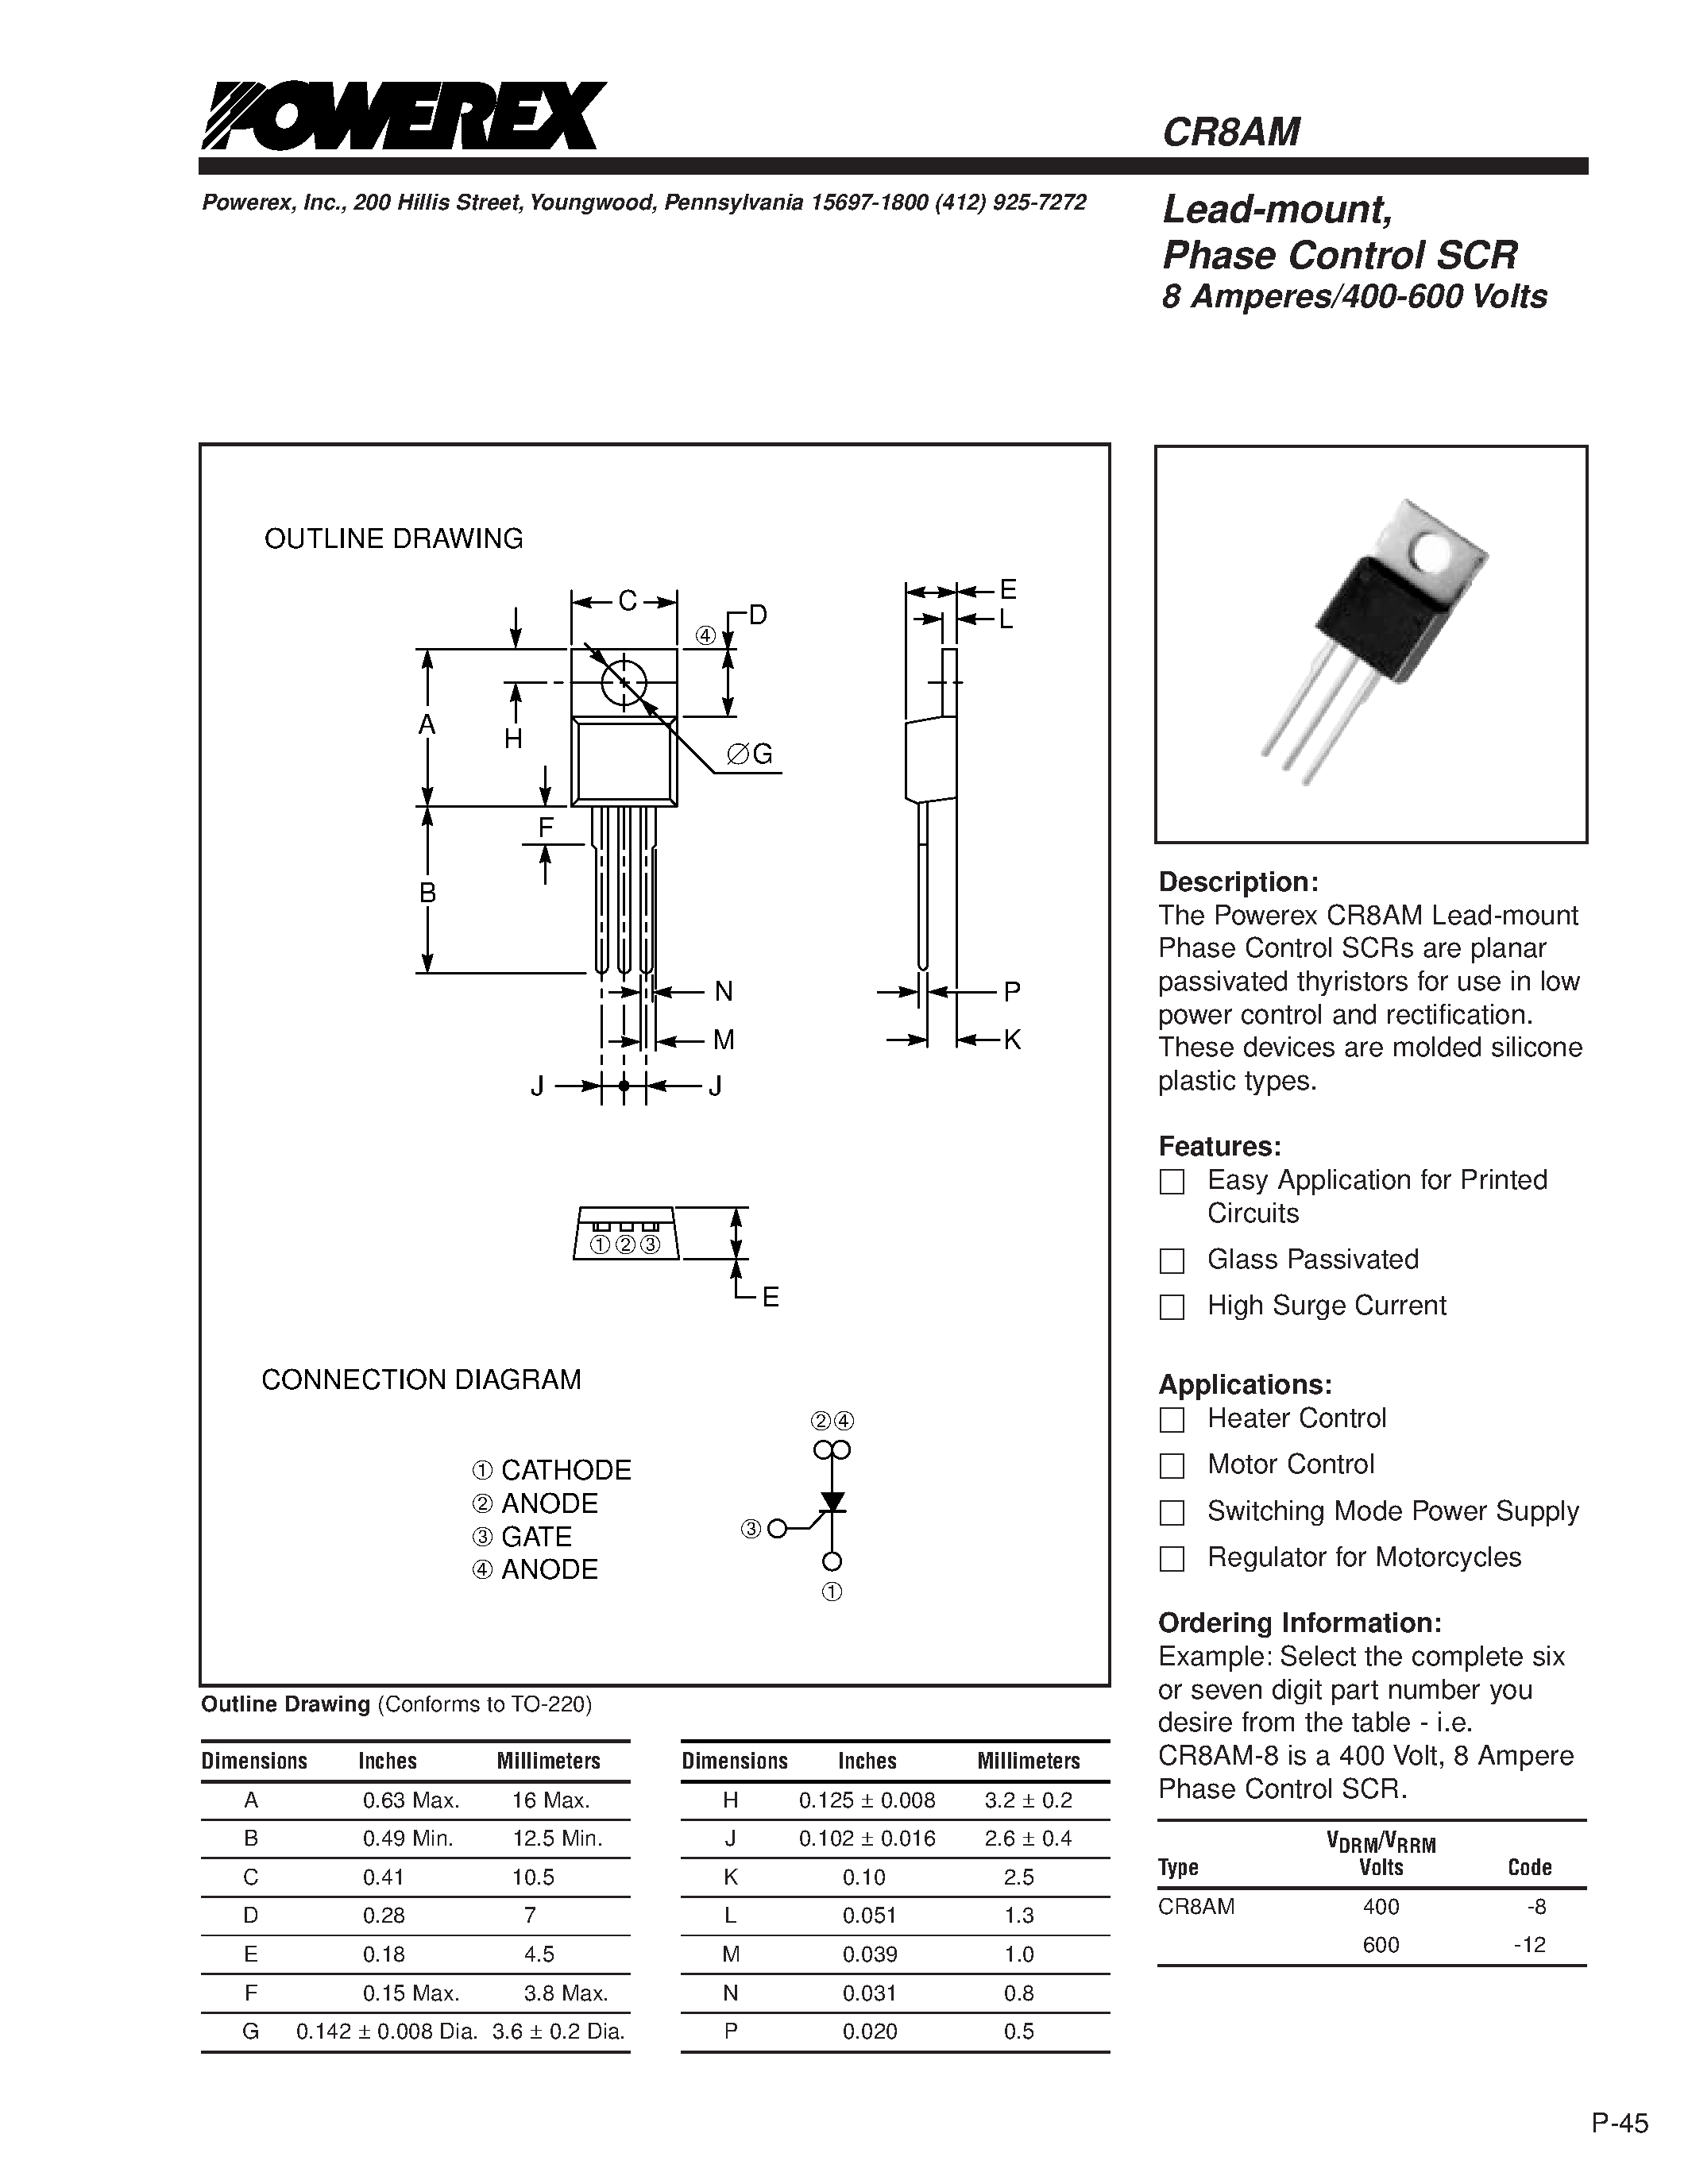 Datasheet CR8AM600-8 - Lead-mount/ Phase Control SCR 8 Amperes/400-600 Volts page 1